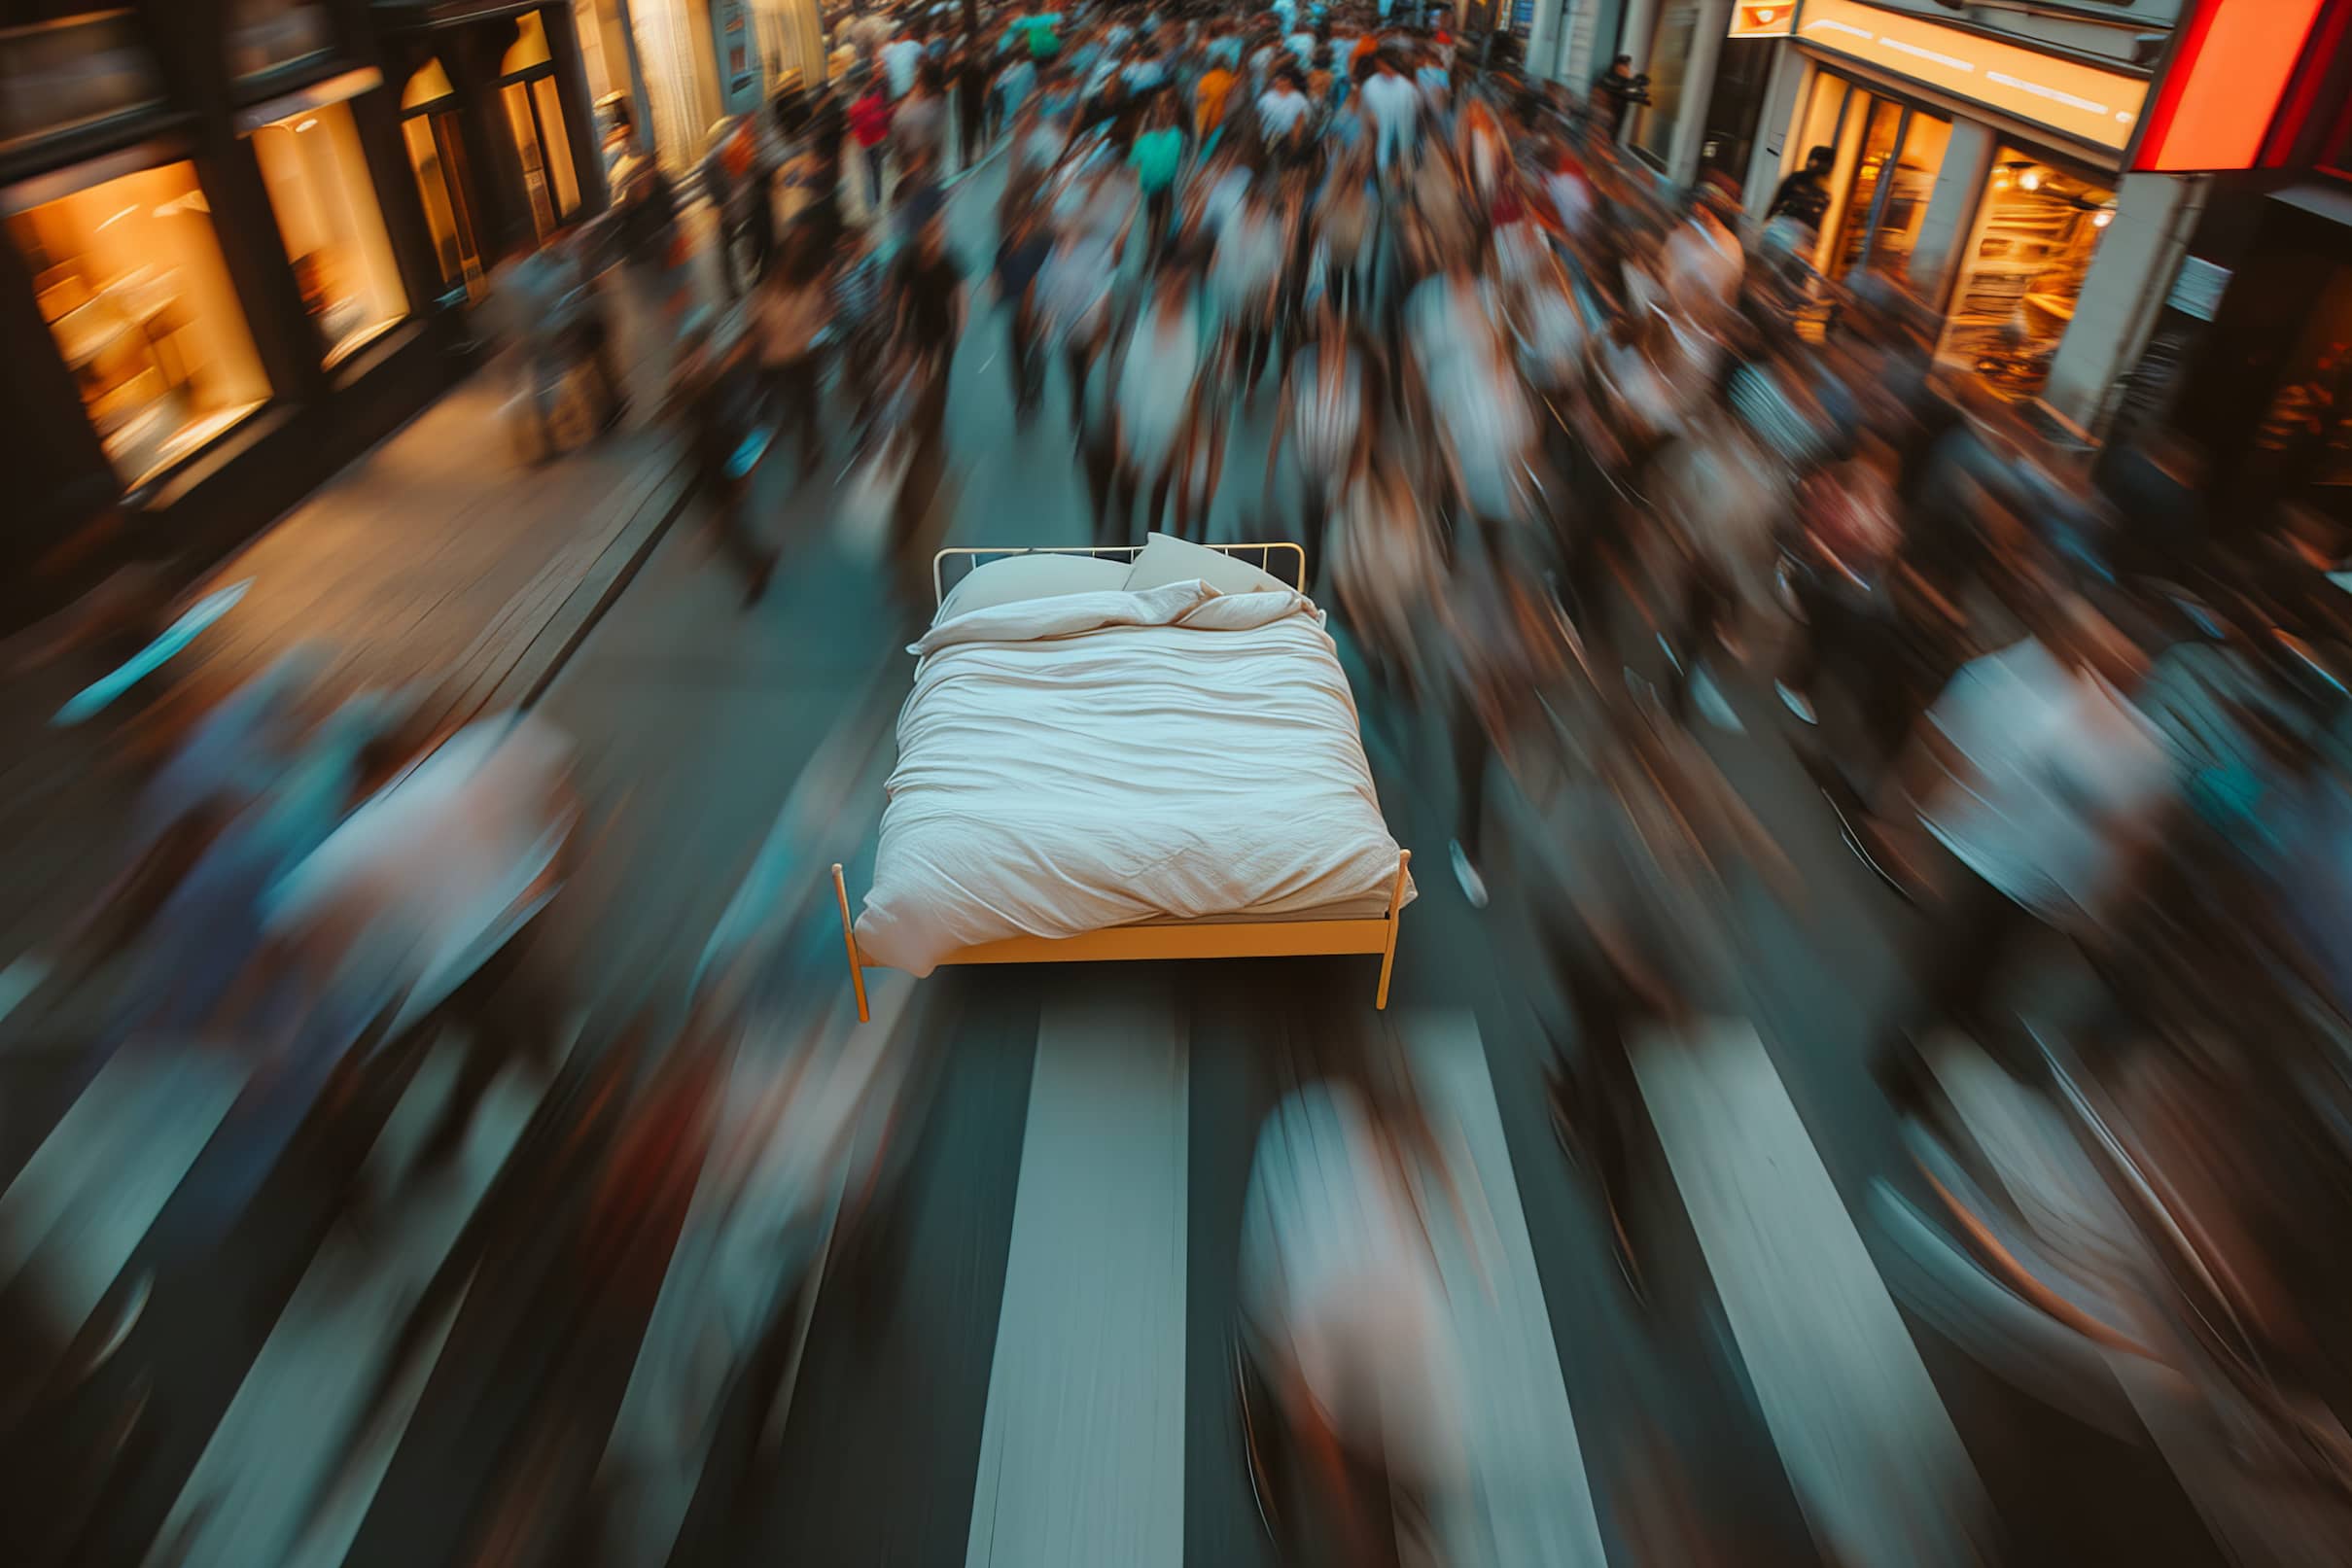 Cozy bed standing in the middle of a crowded street to represent insomnia.